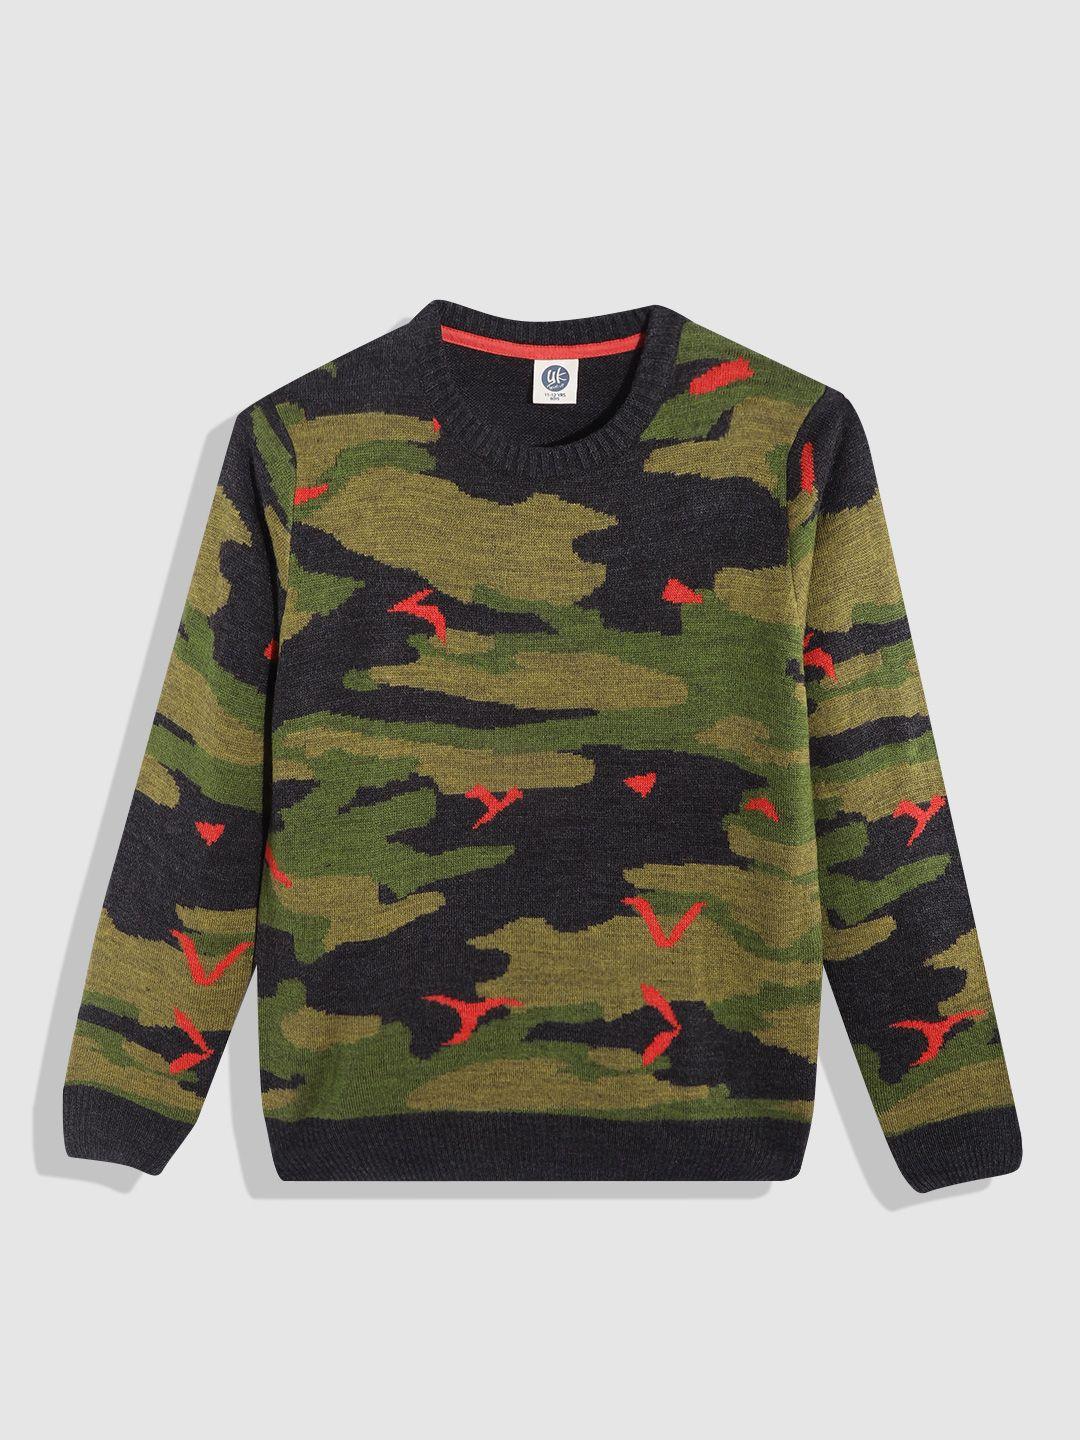 yk-boys-green-&-black-camouflage-printed-pullover